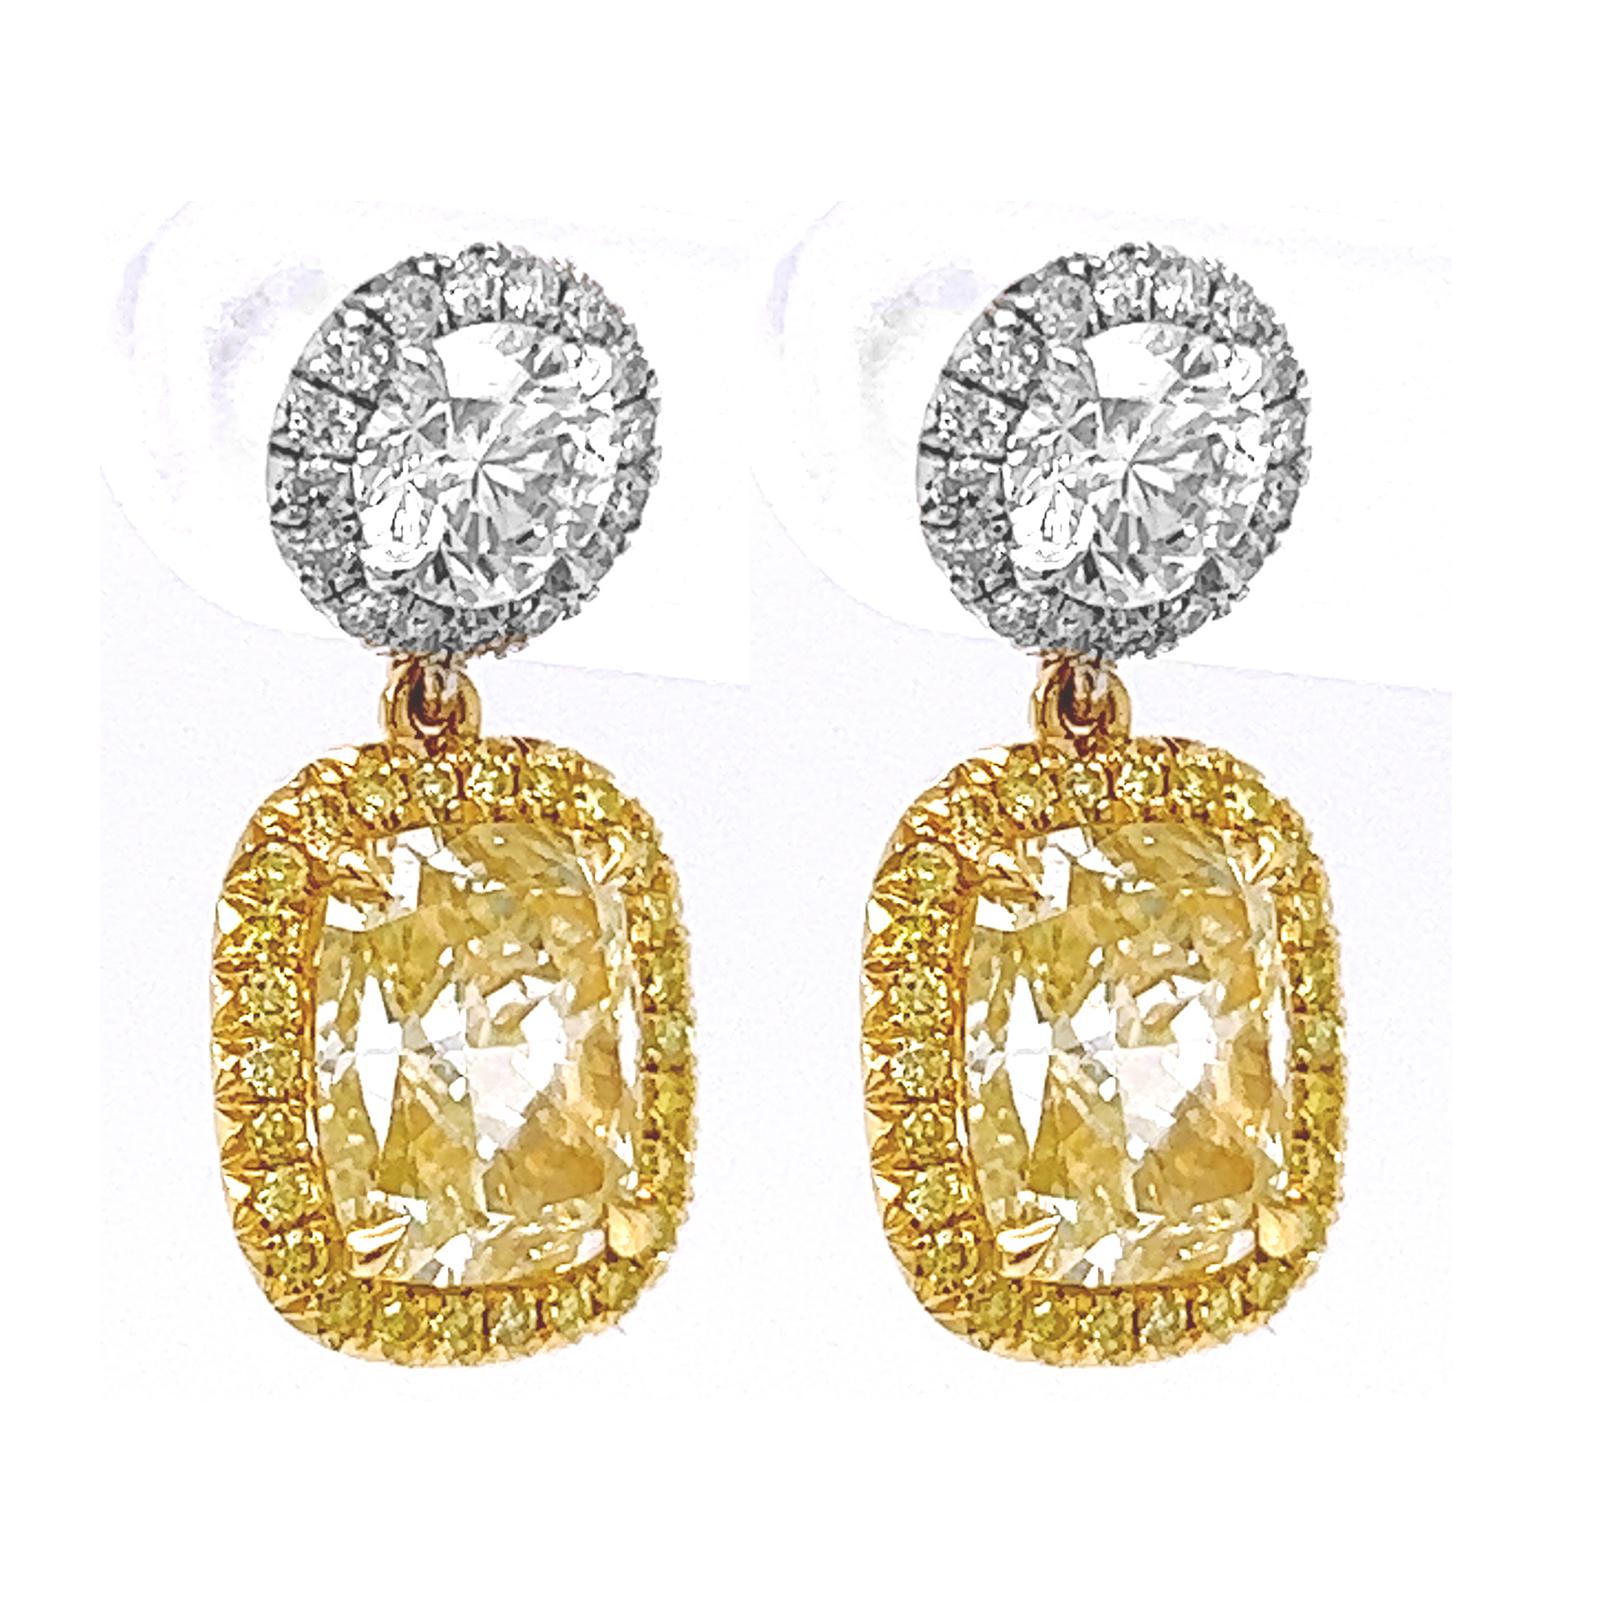 Cushion Cut 4.42 Carat T.W. Natural Mined Fancy Yellow Diamond Halo Cocktail Earrings 18KT  For Sale